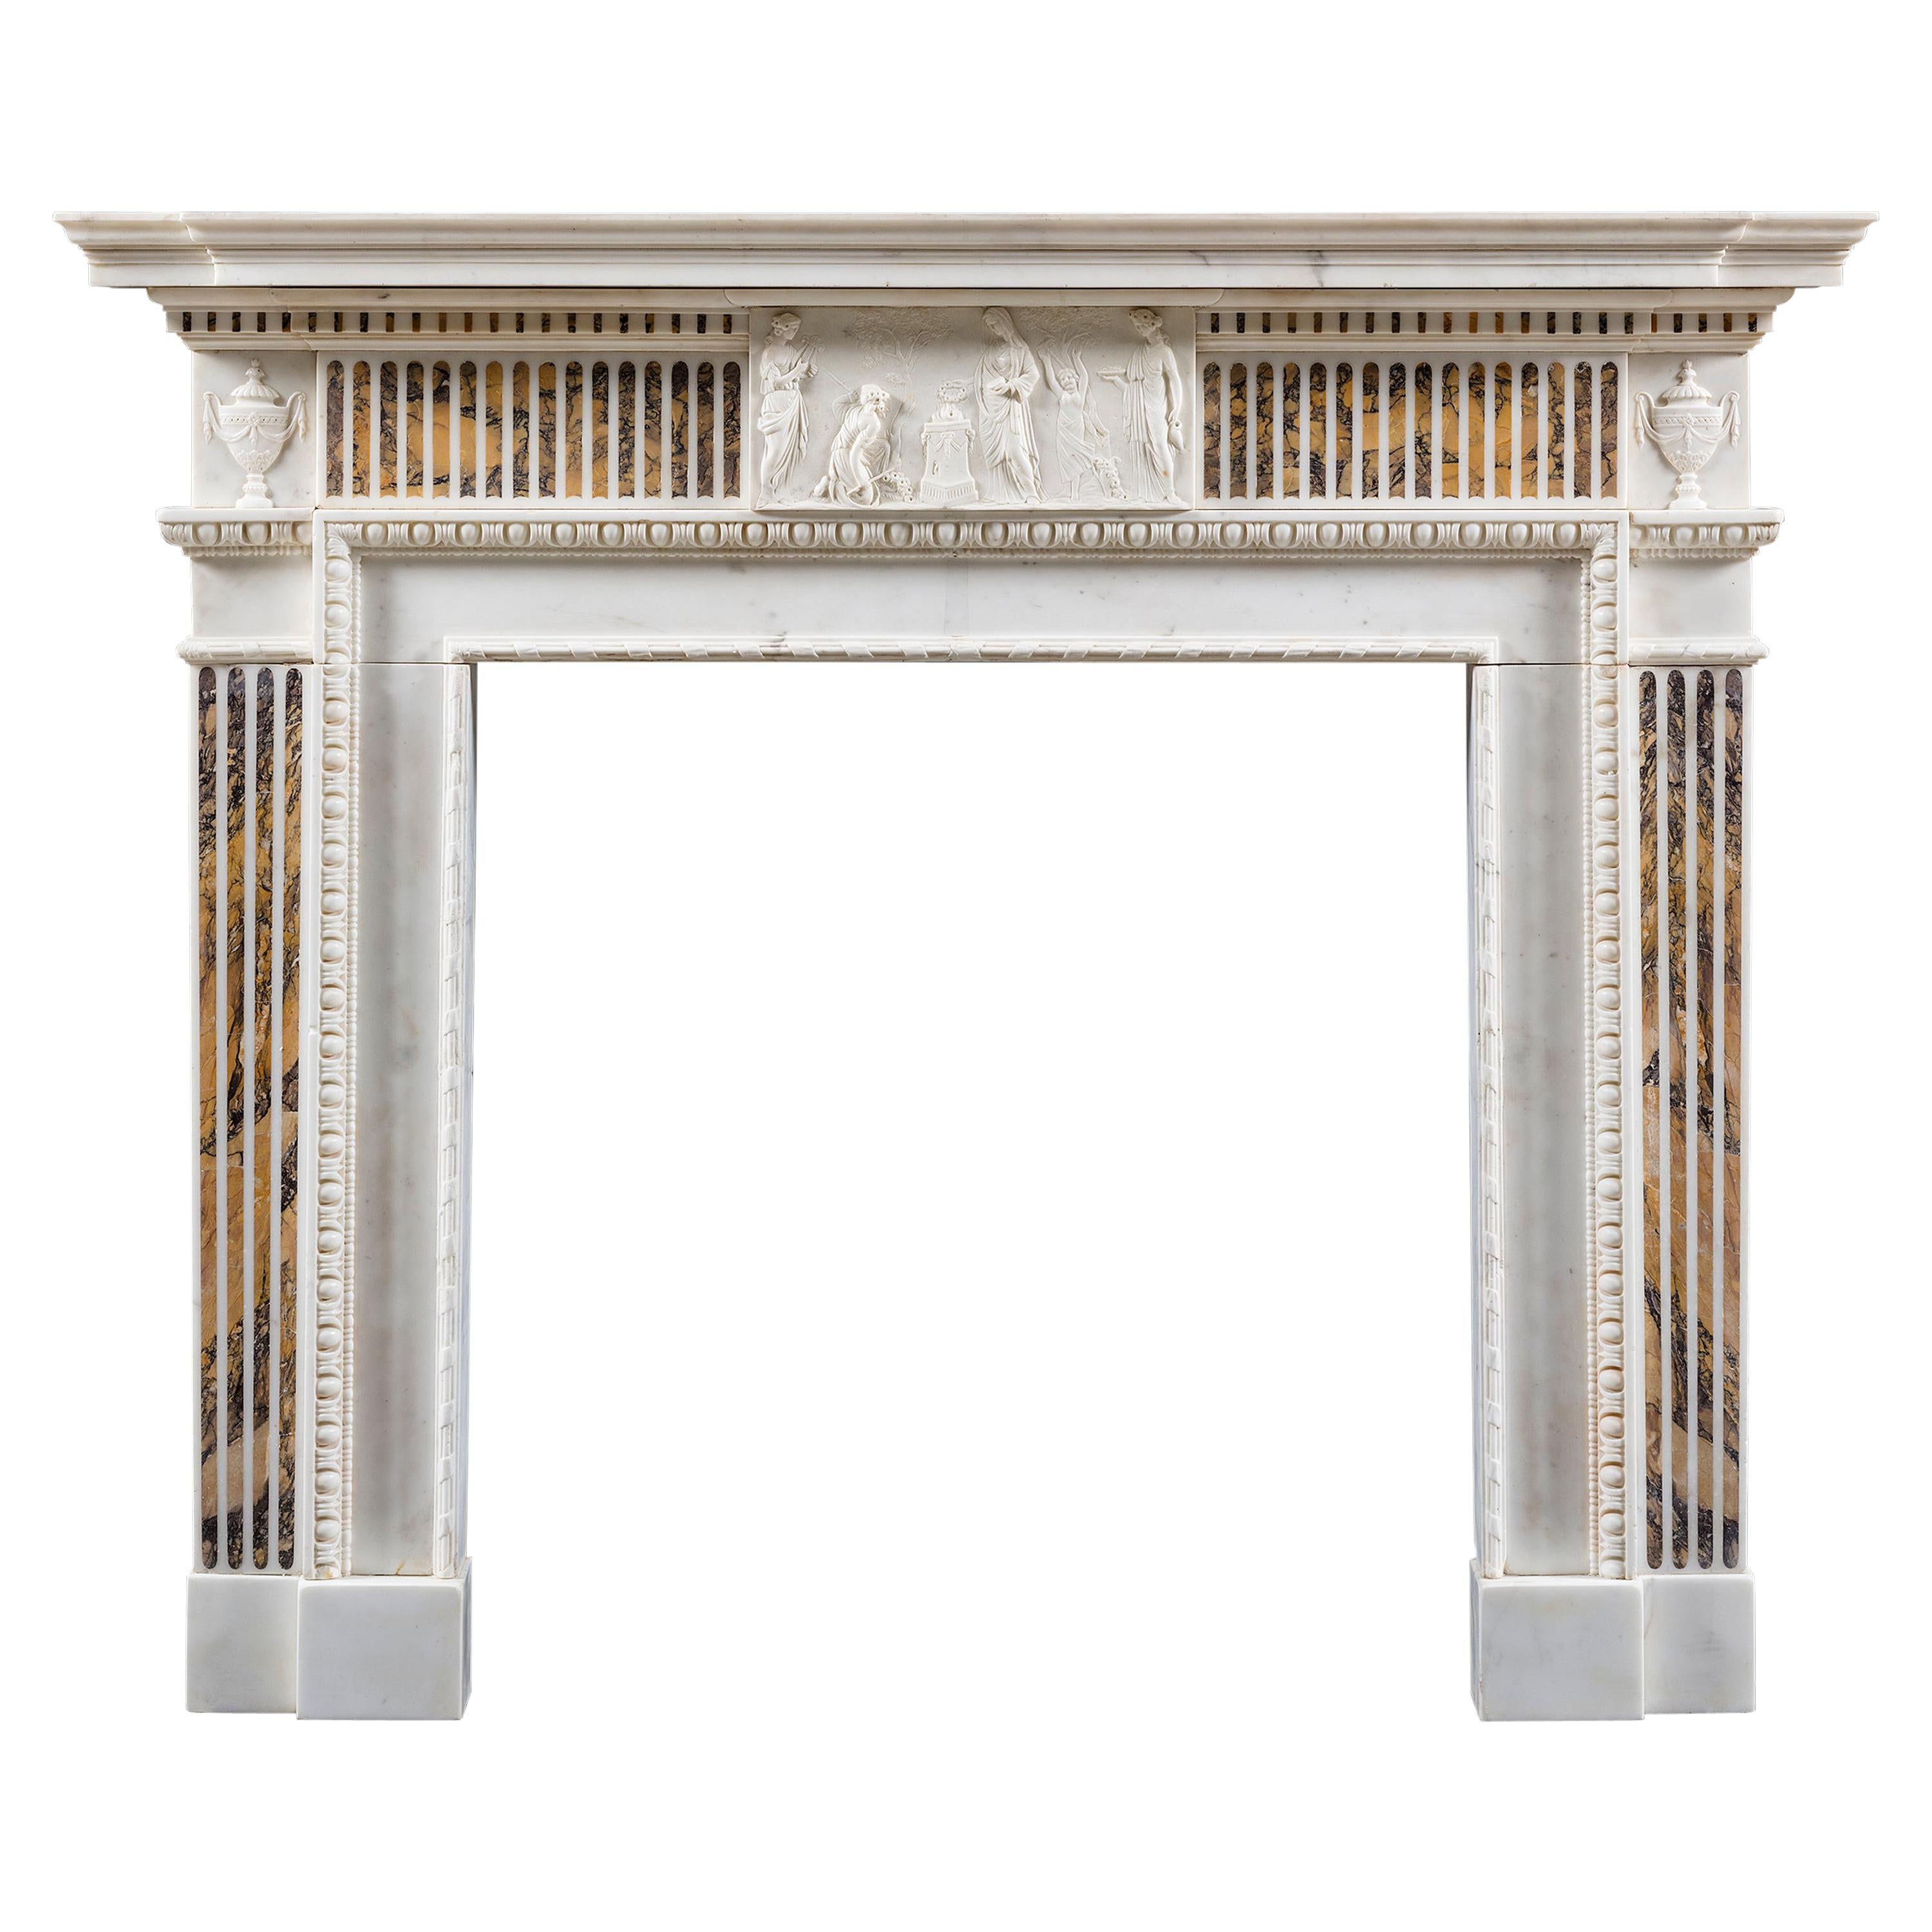 George III Neoclassical Chimneypiece in Statuary and Siena Marbles